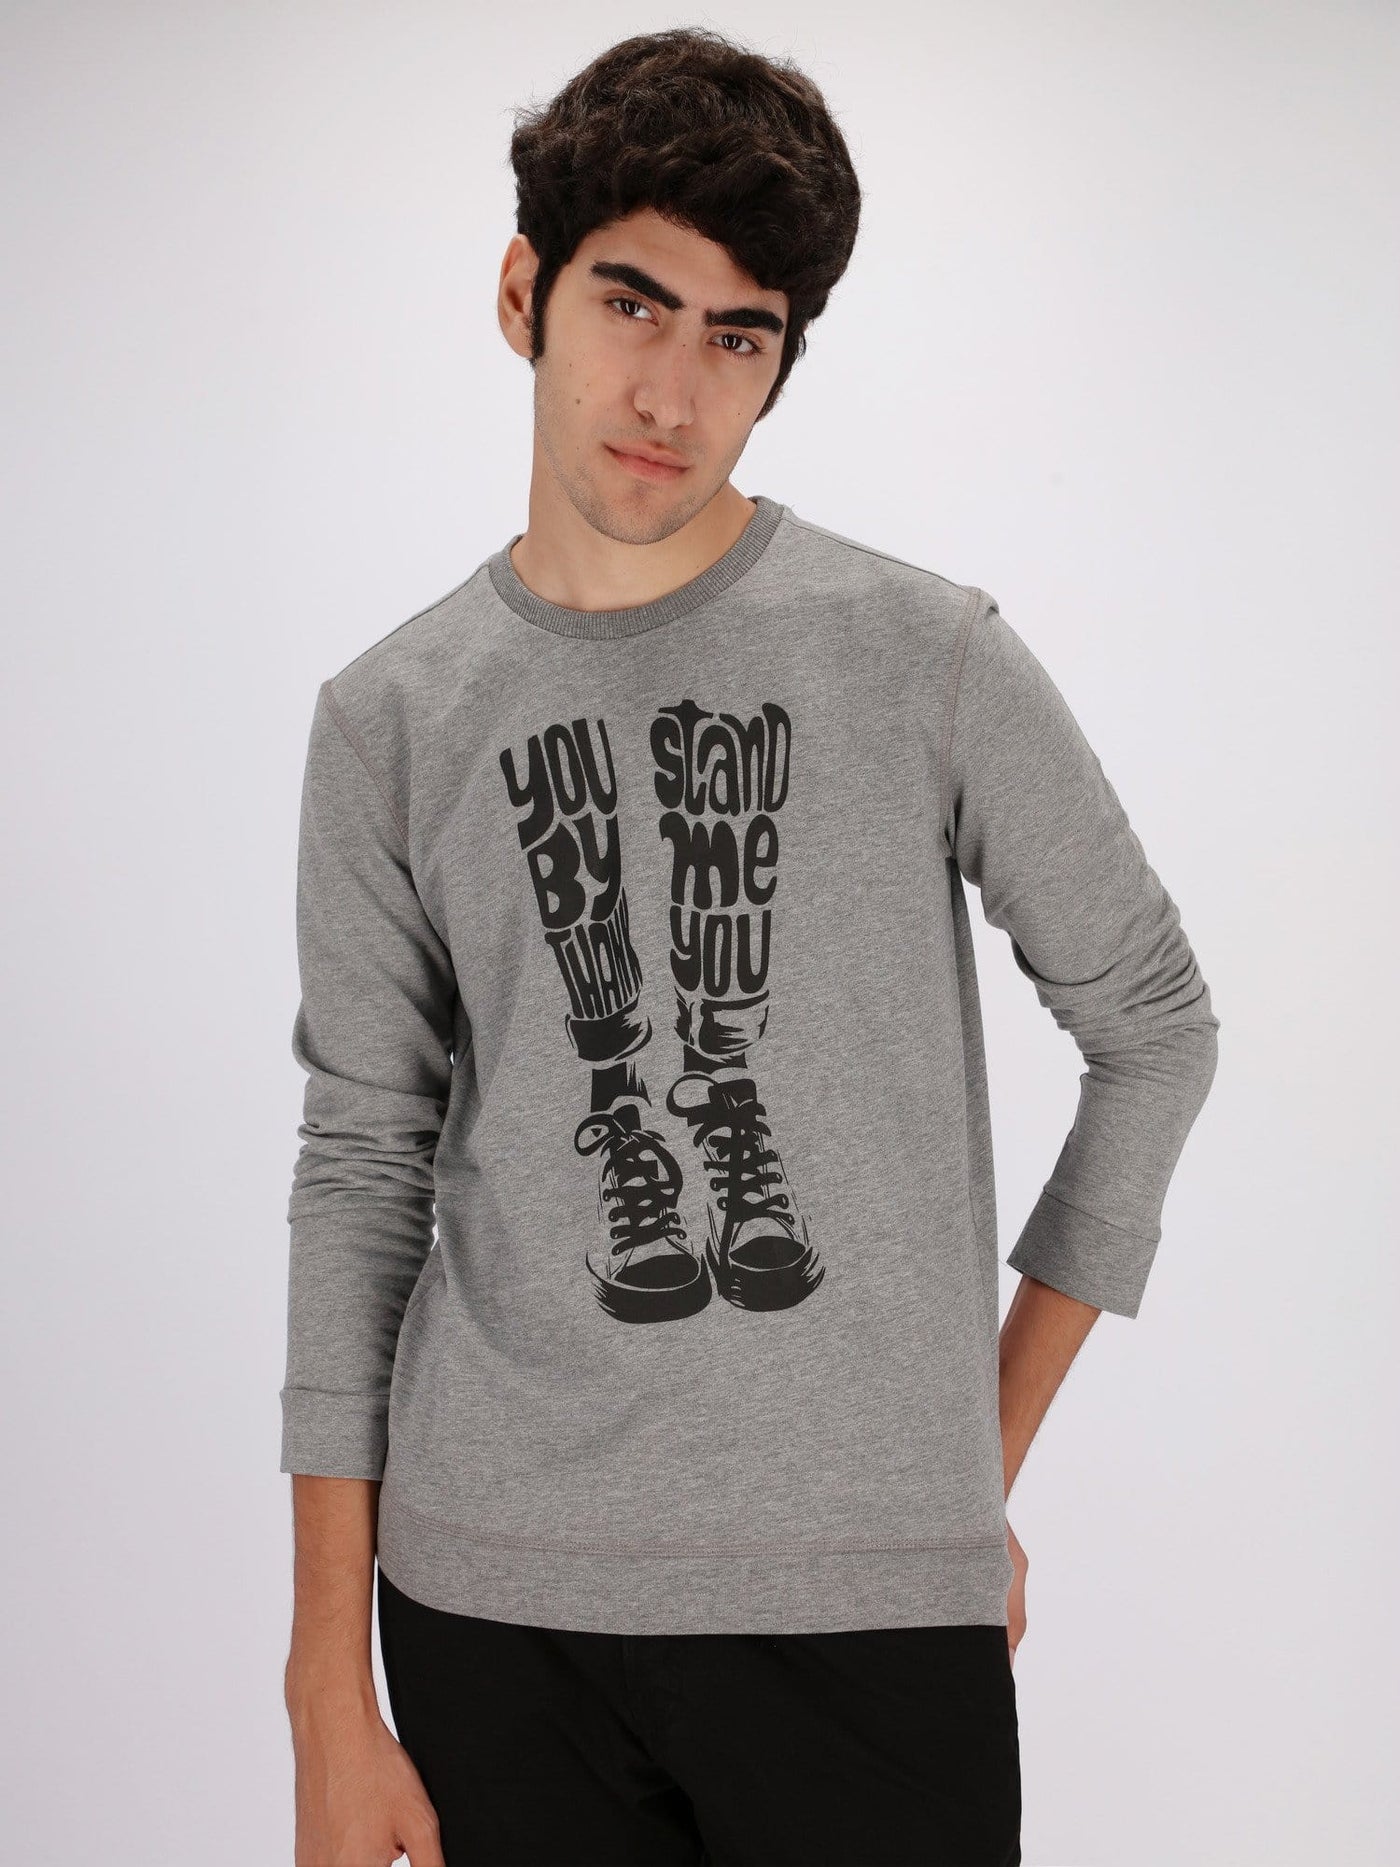 OR T-Shirts Heather Grey / S Stand by Me Long Sleeve T-Shirt